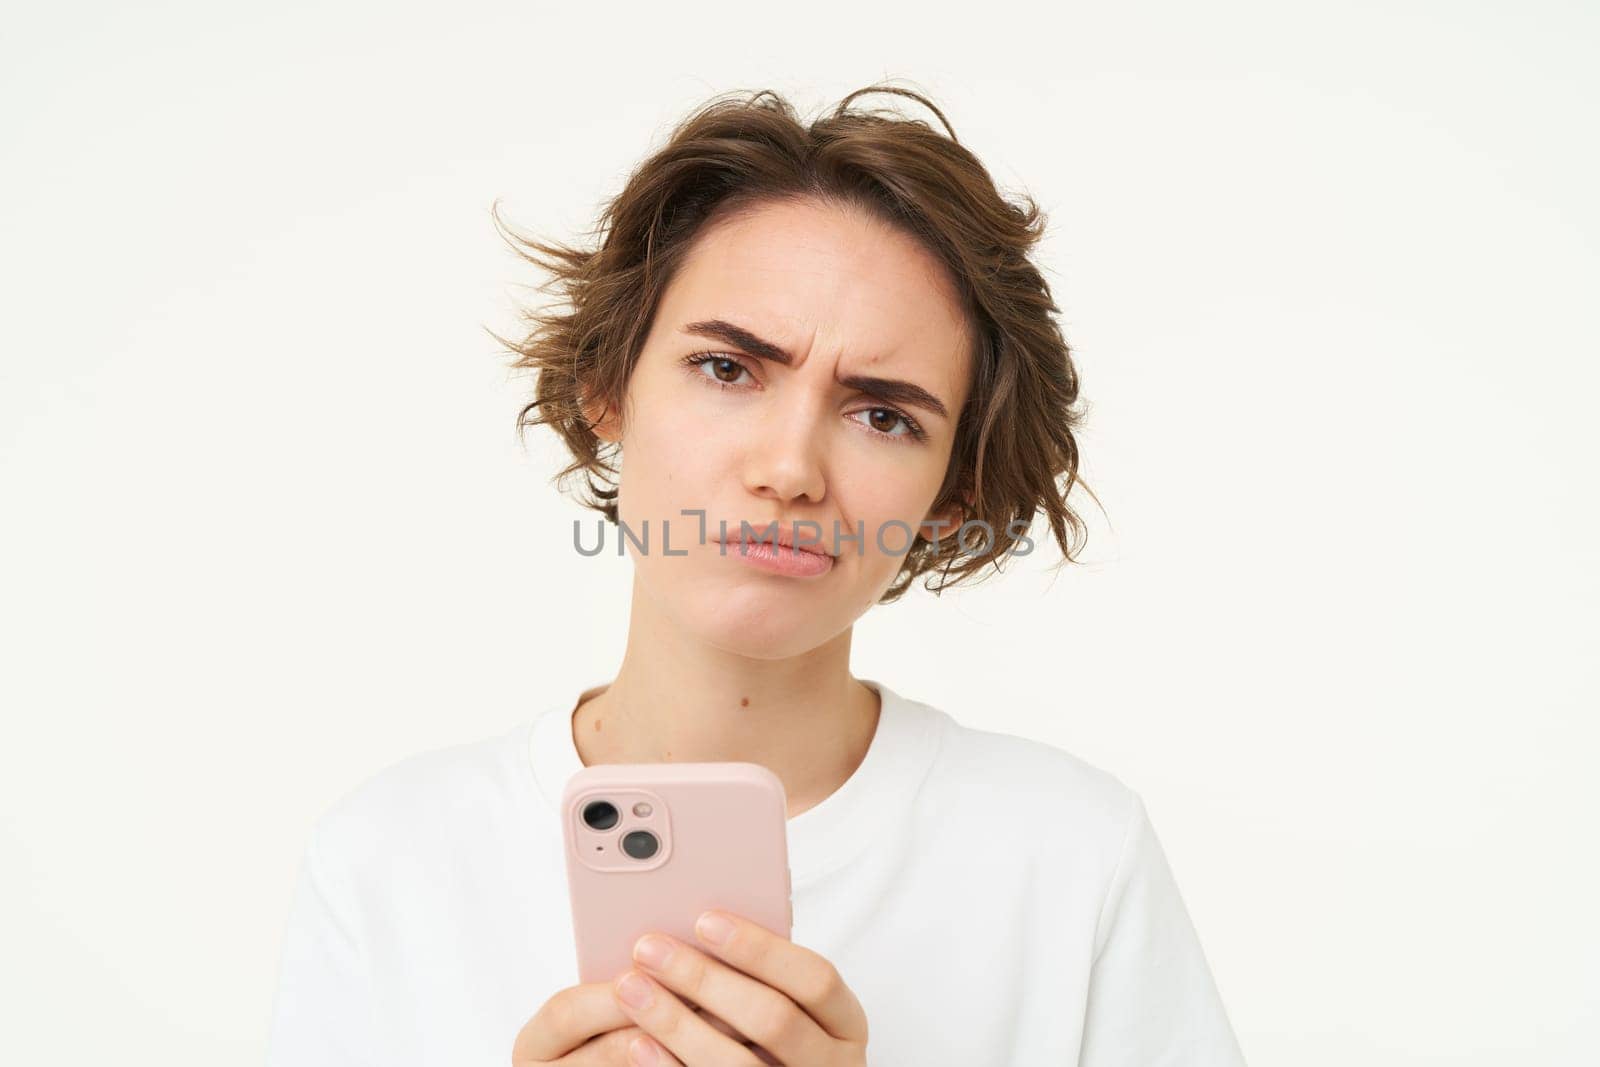 Image of complicated, confused young woman, frowning, holding smartphone, looking puzzled and doubtful, standing over white background.